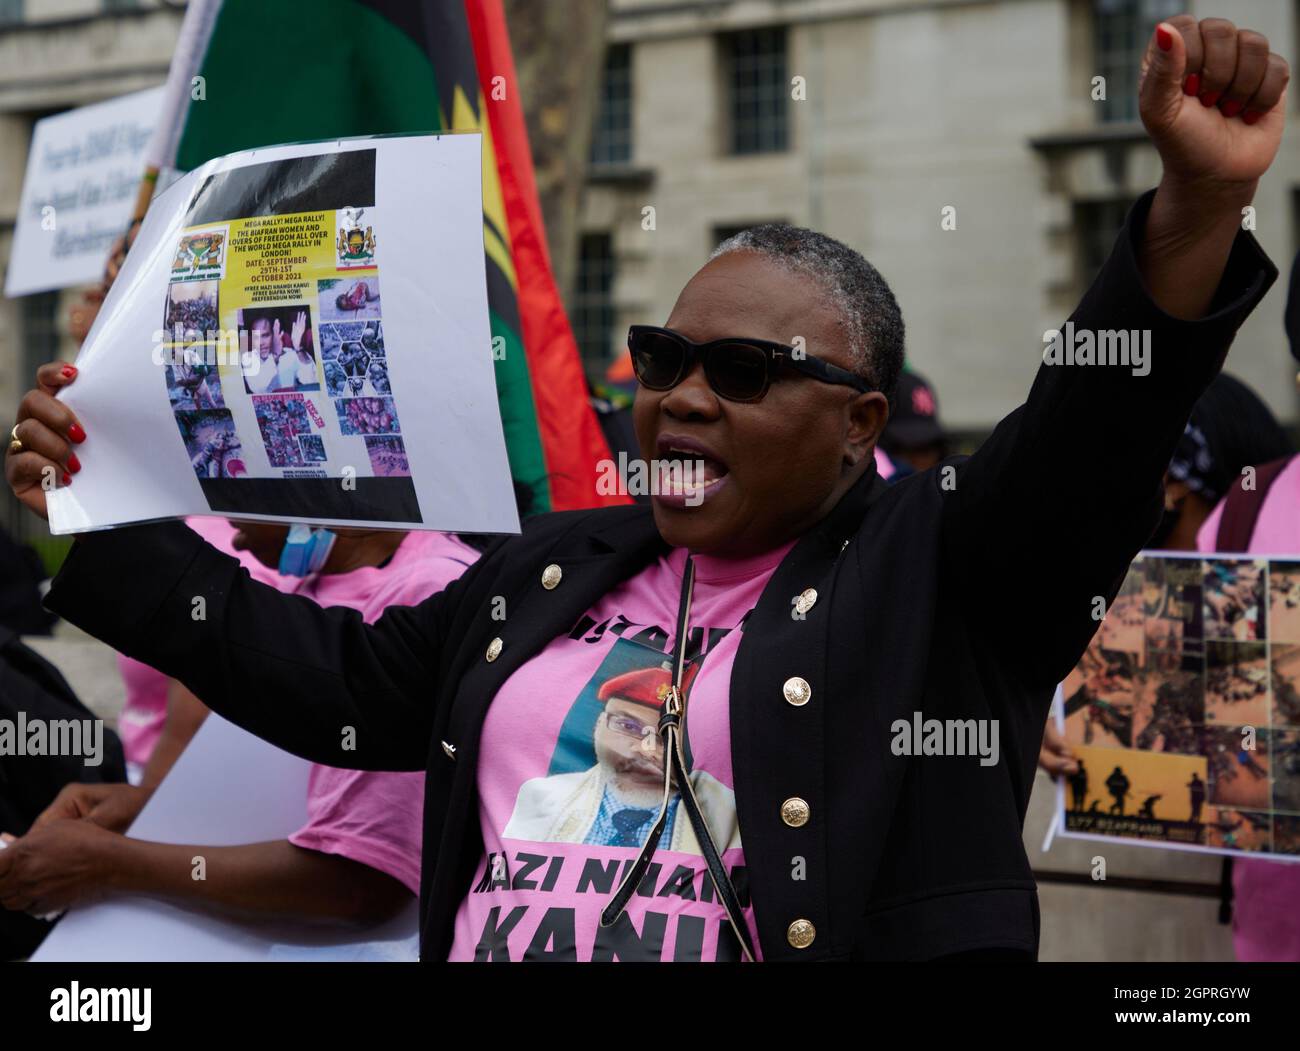 London, UK. 29th September 2021. Biafran people in diaspora protesting at the Biafra Women London Mega Rally in central London asking for British help of the release of the British citizen Mazi Hnamdi Kanu from Nigerian jail, international attention to the breaches of human rights against its people and for a referendum for the independence of Biafra. Alamy Reportage / Joe Kuis Stock Photo